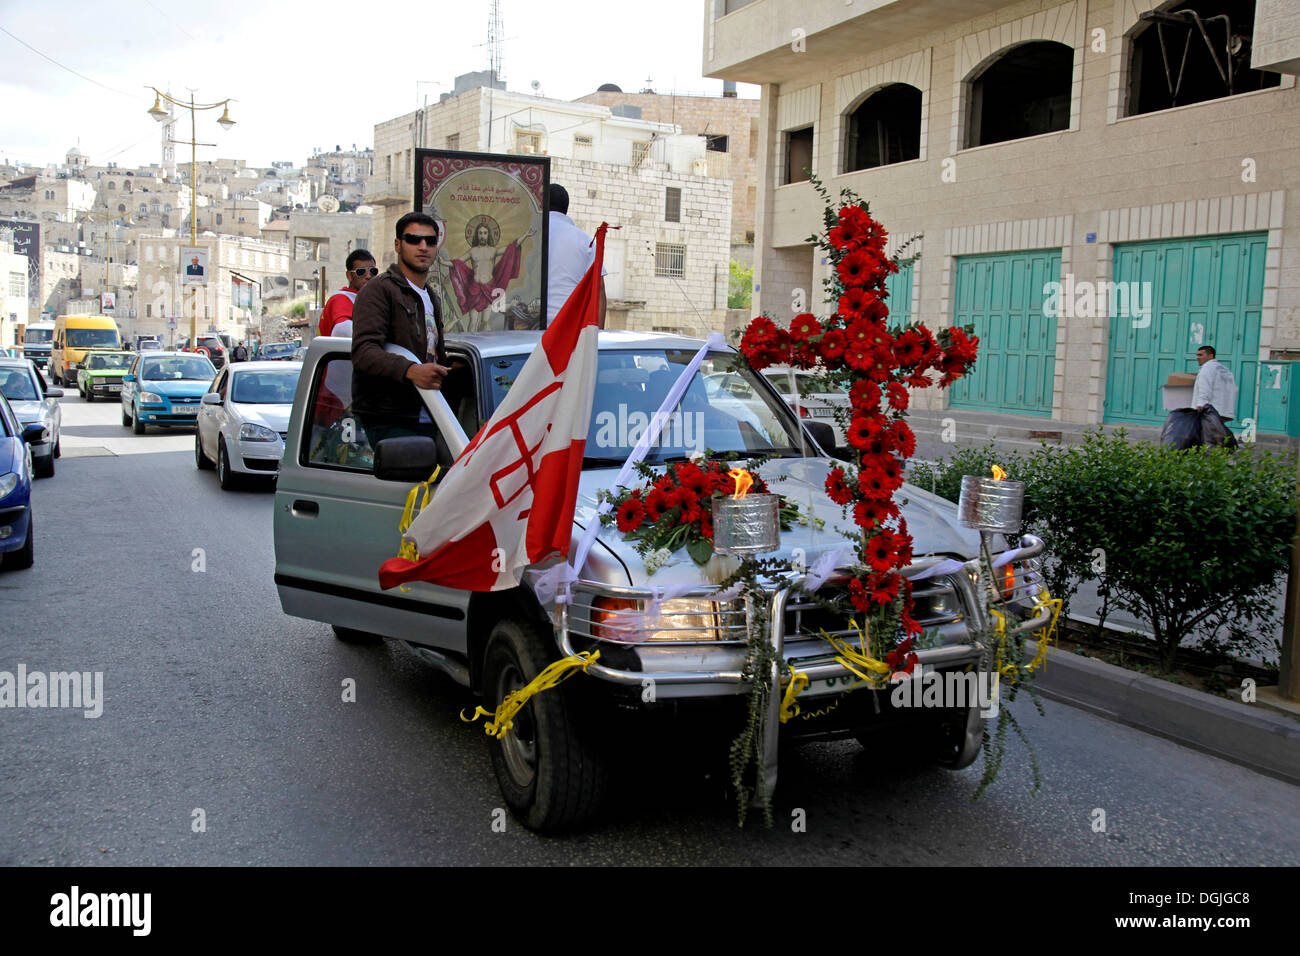 Street parade with a decorated car on Holy Saturday, Bethlehem, West Bank, Israel, Middle East Stock Photo